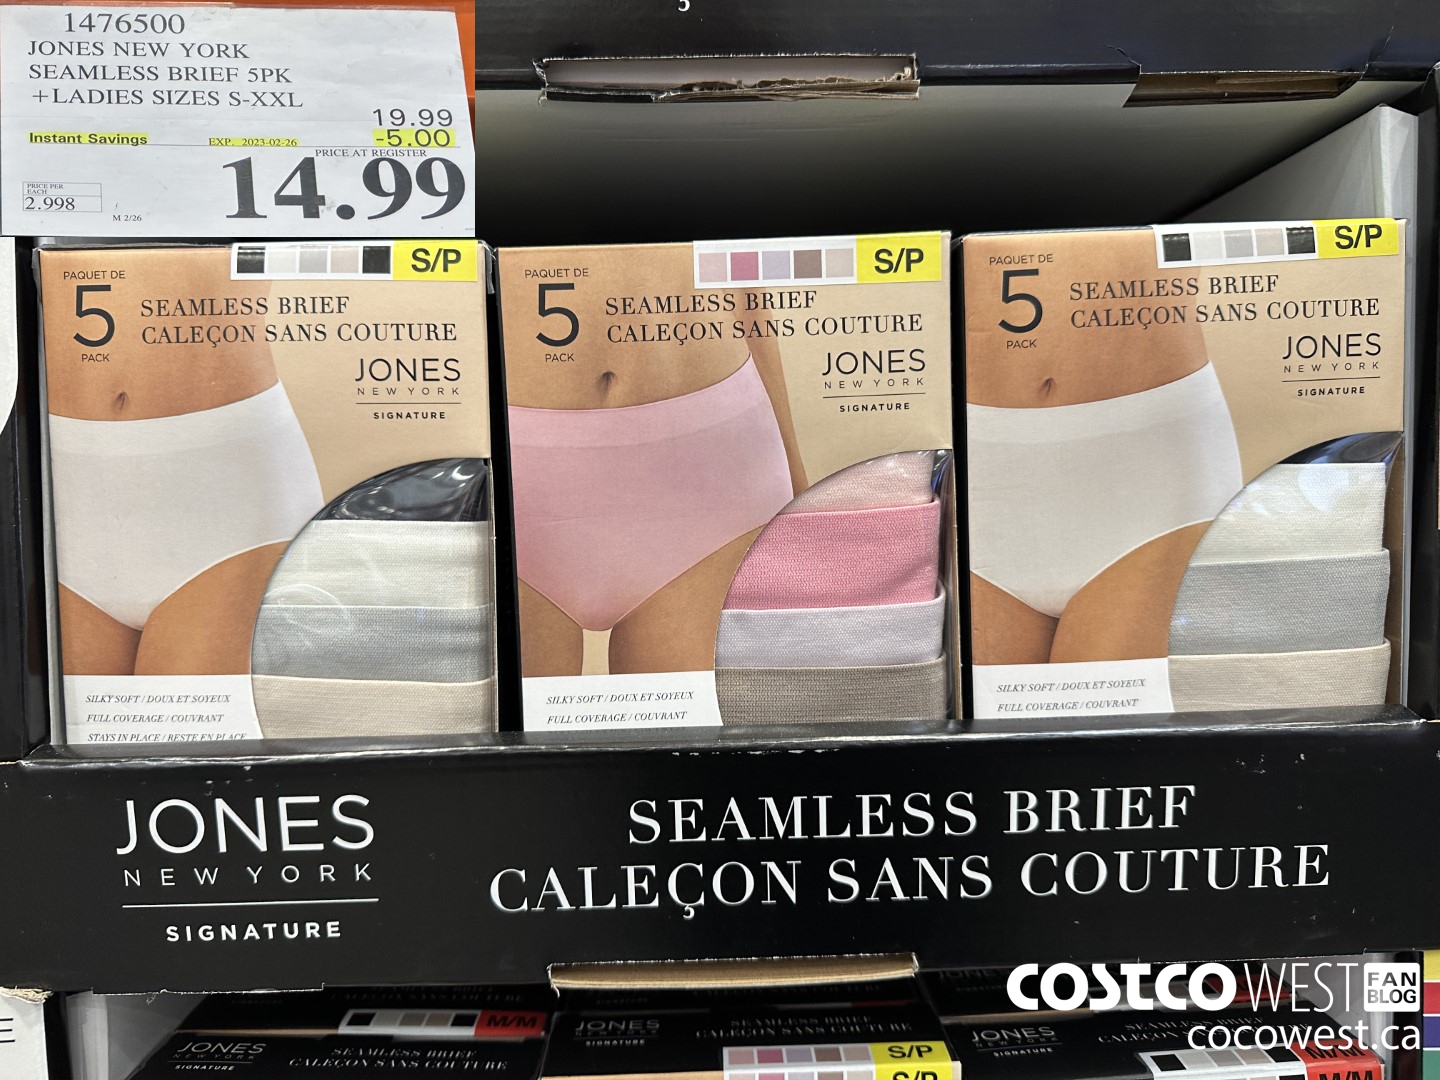 Weekend Update! – Costco Sale Items for Feb 24-26, 2023 for BC, AB, MB, SK  - Costco West Fan Blog